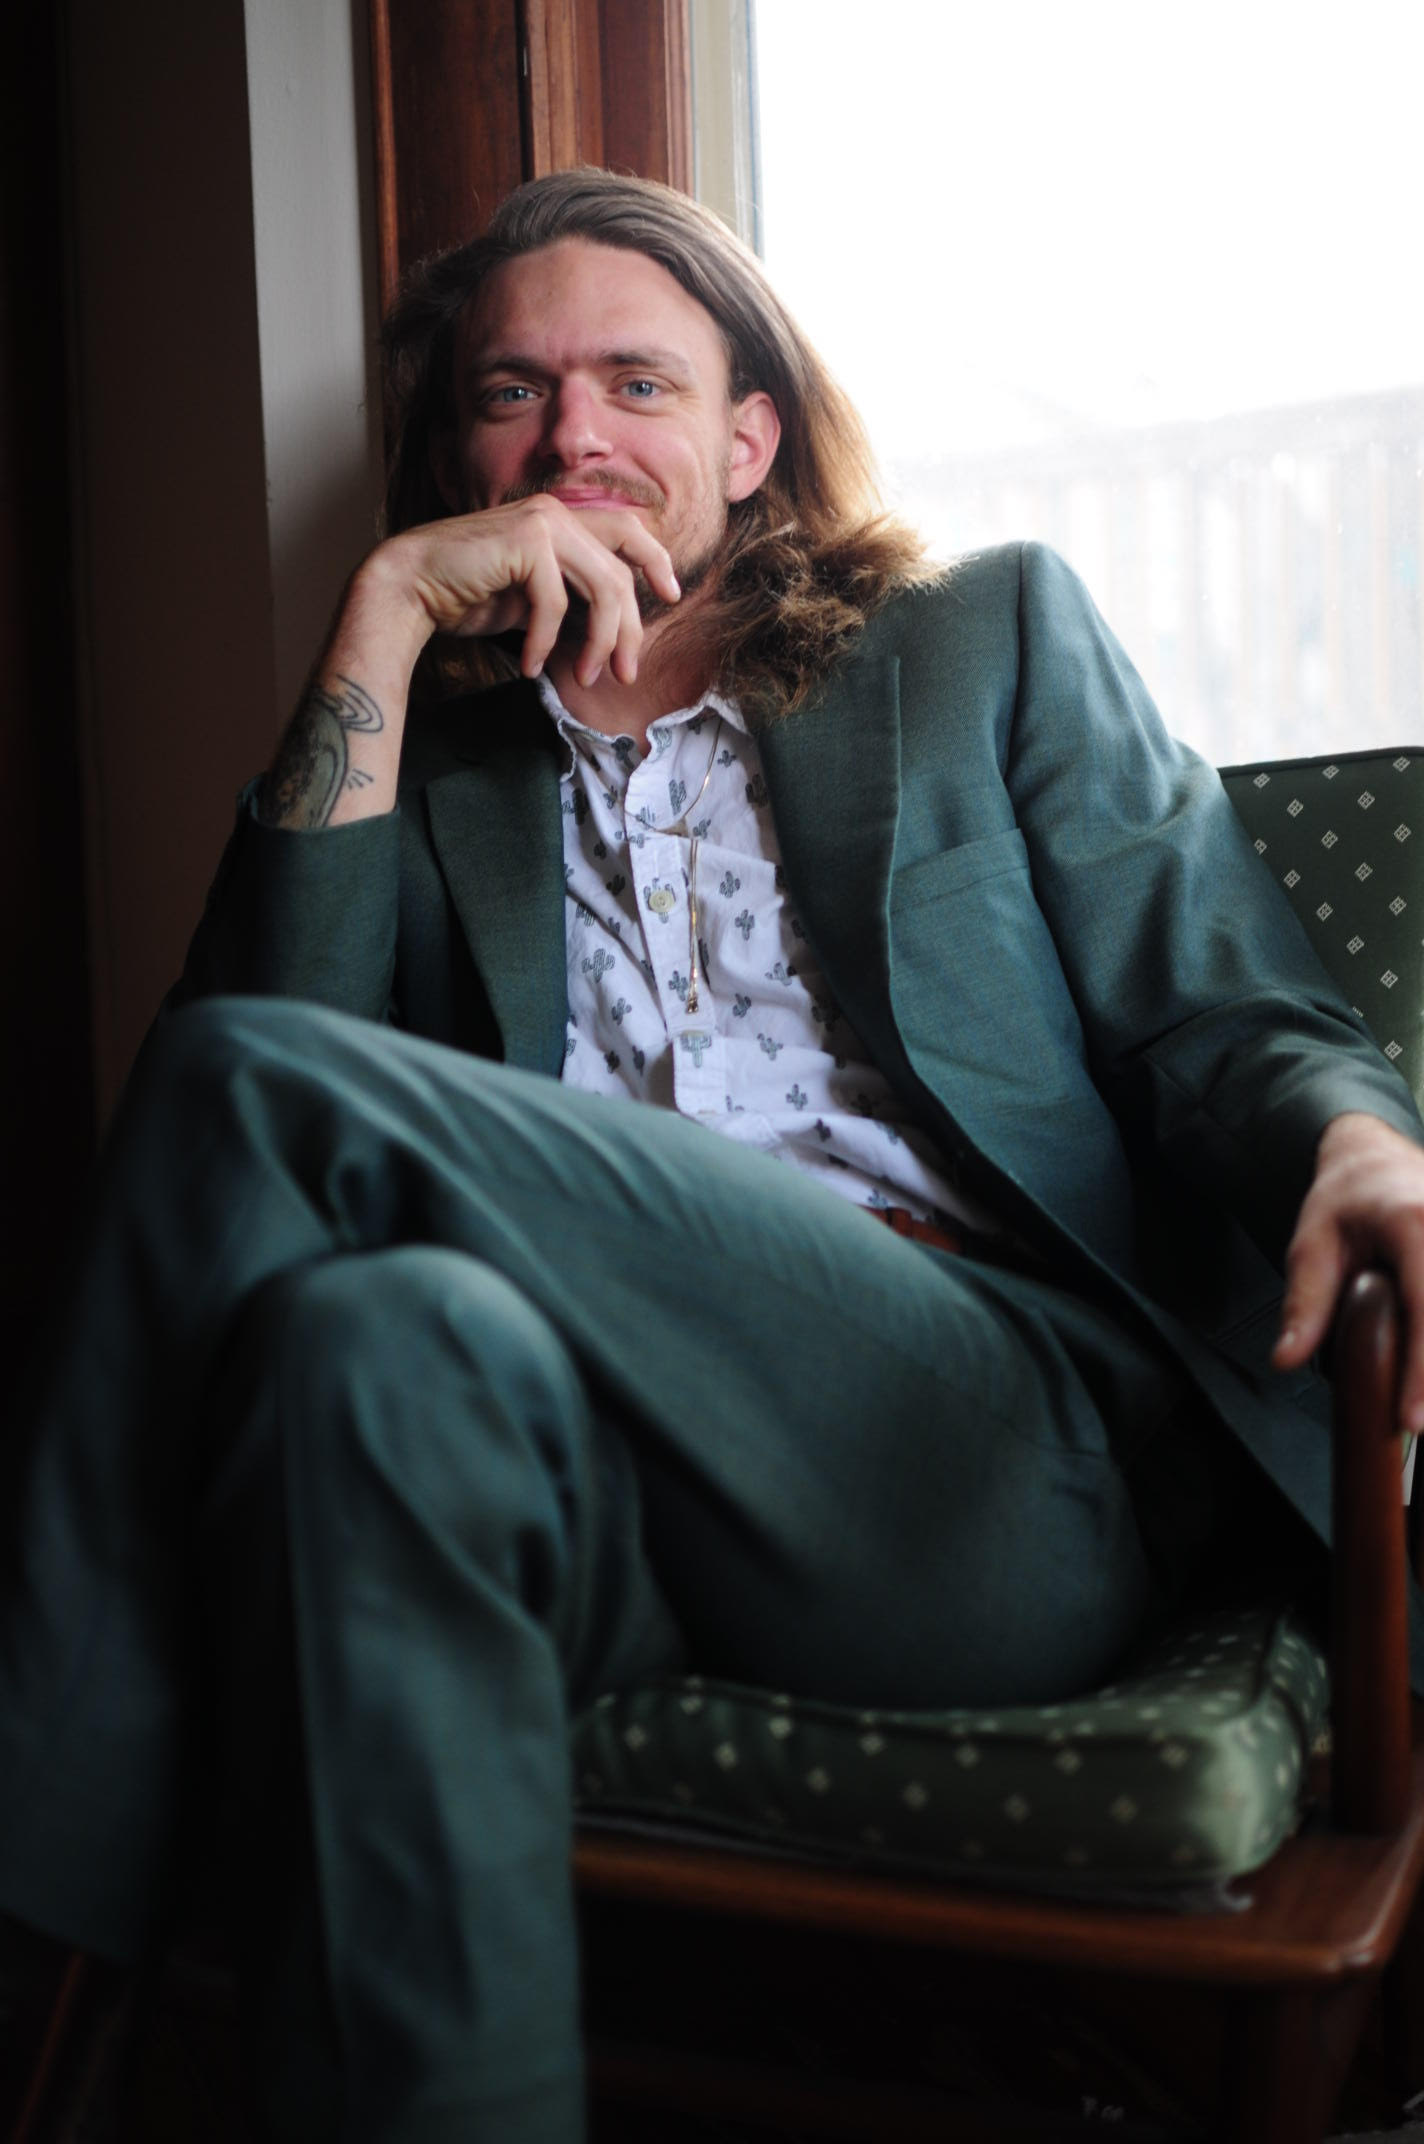 Jon Ruhl, wearing a green suit, sits in front of a window